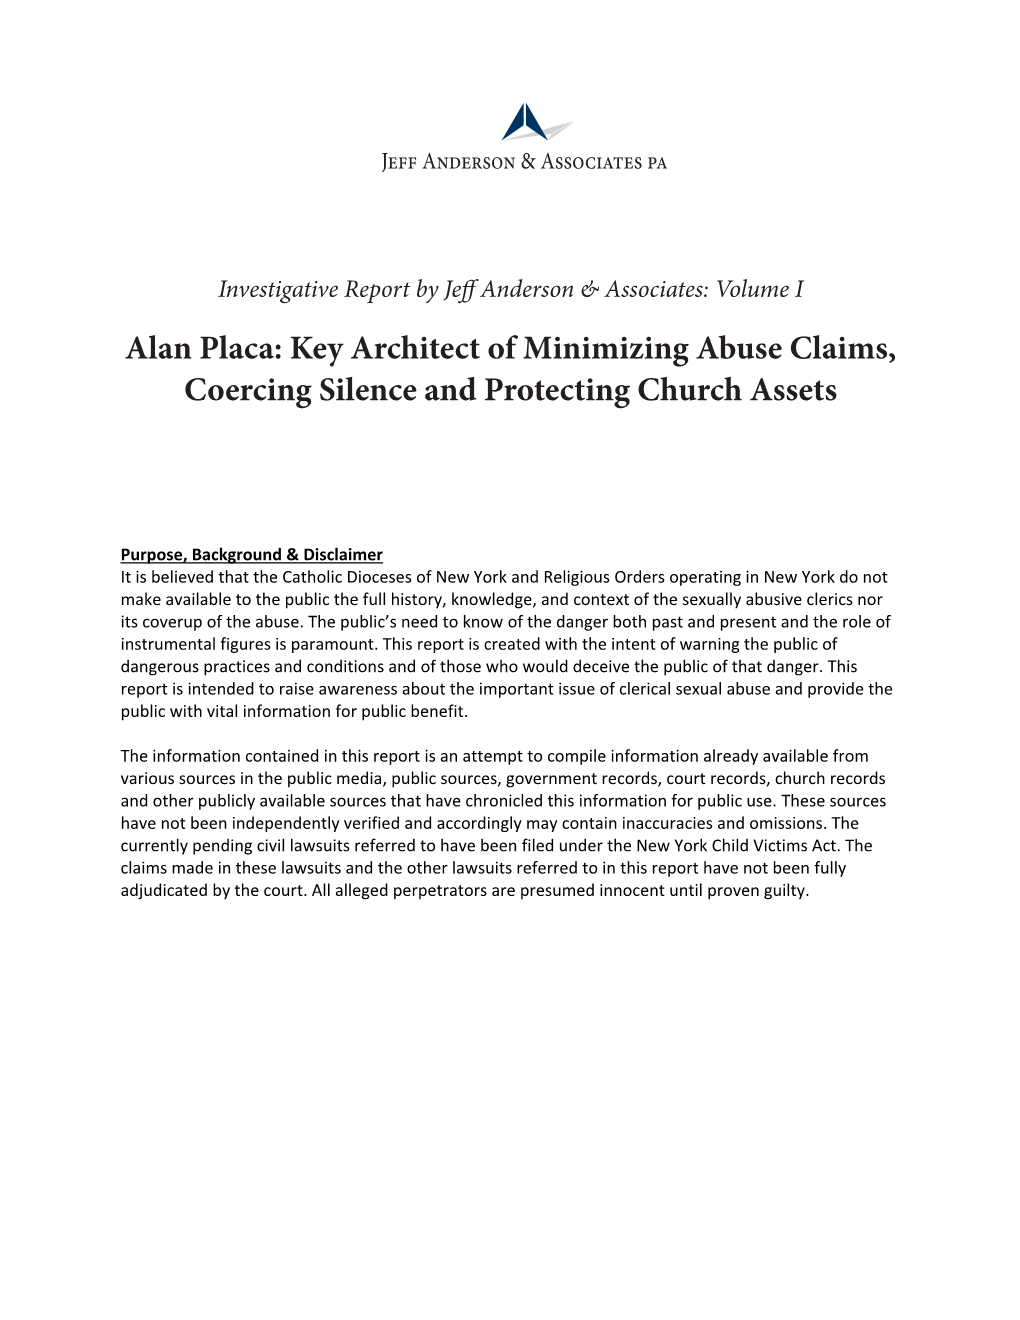 Alan Placa: Key Architect of Minimizing Abuse Claims, Coercing Silence and Protecting Church Assets